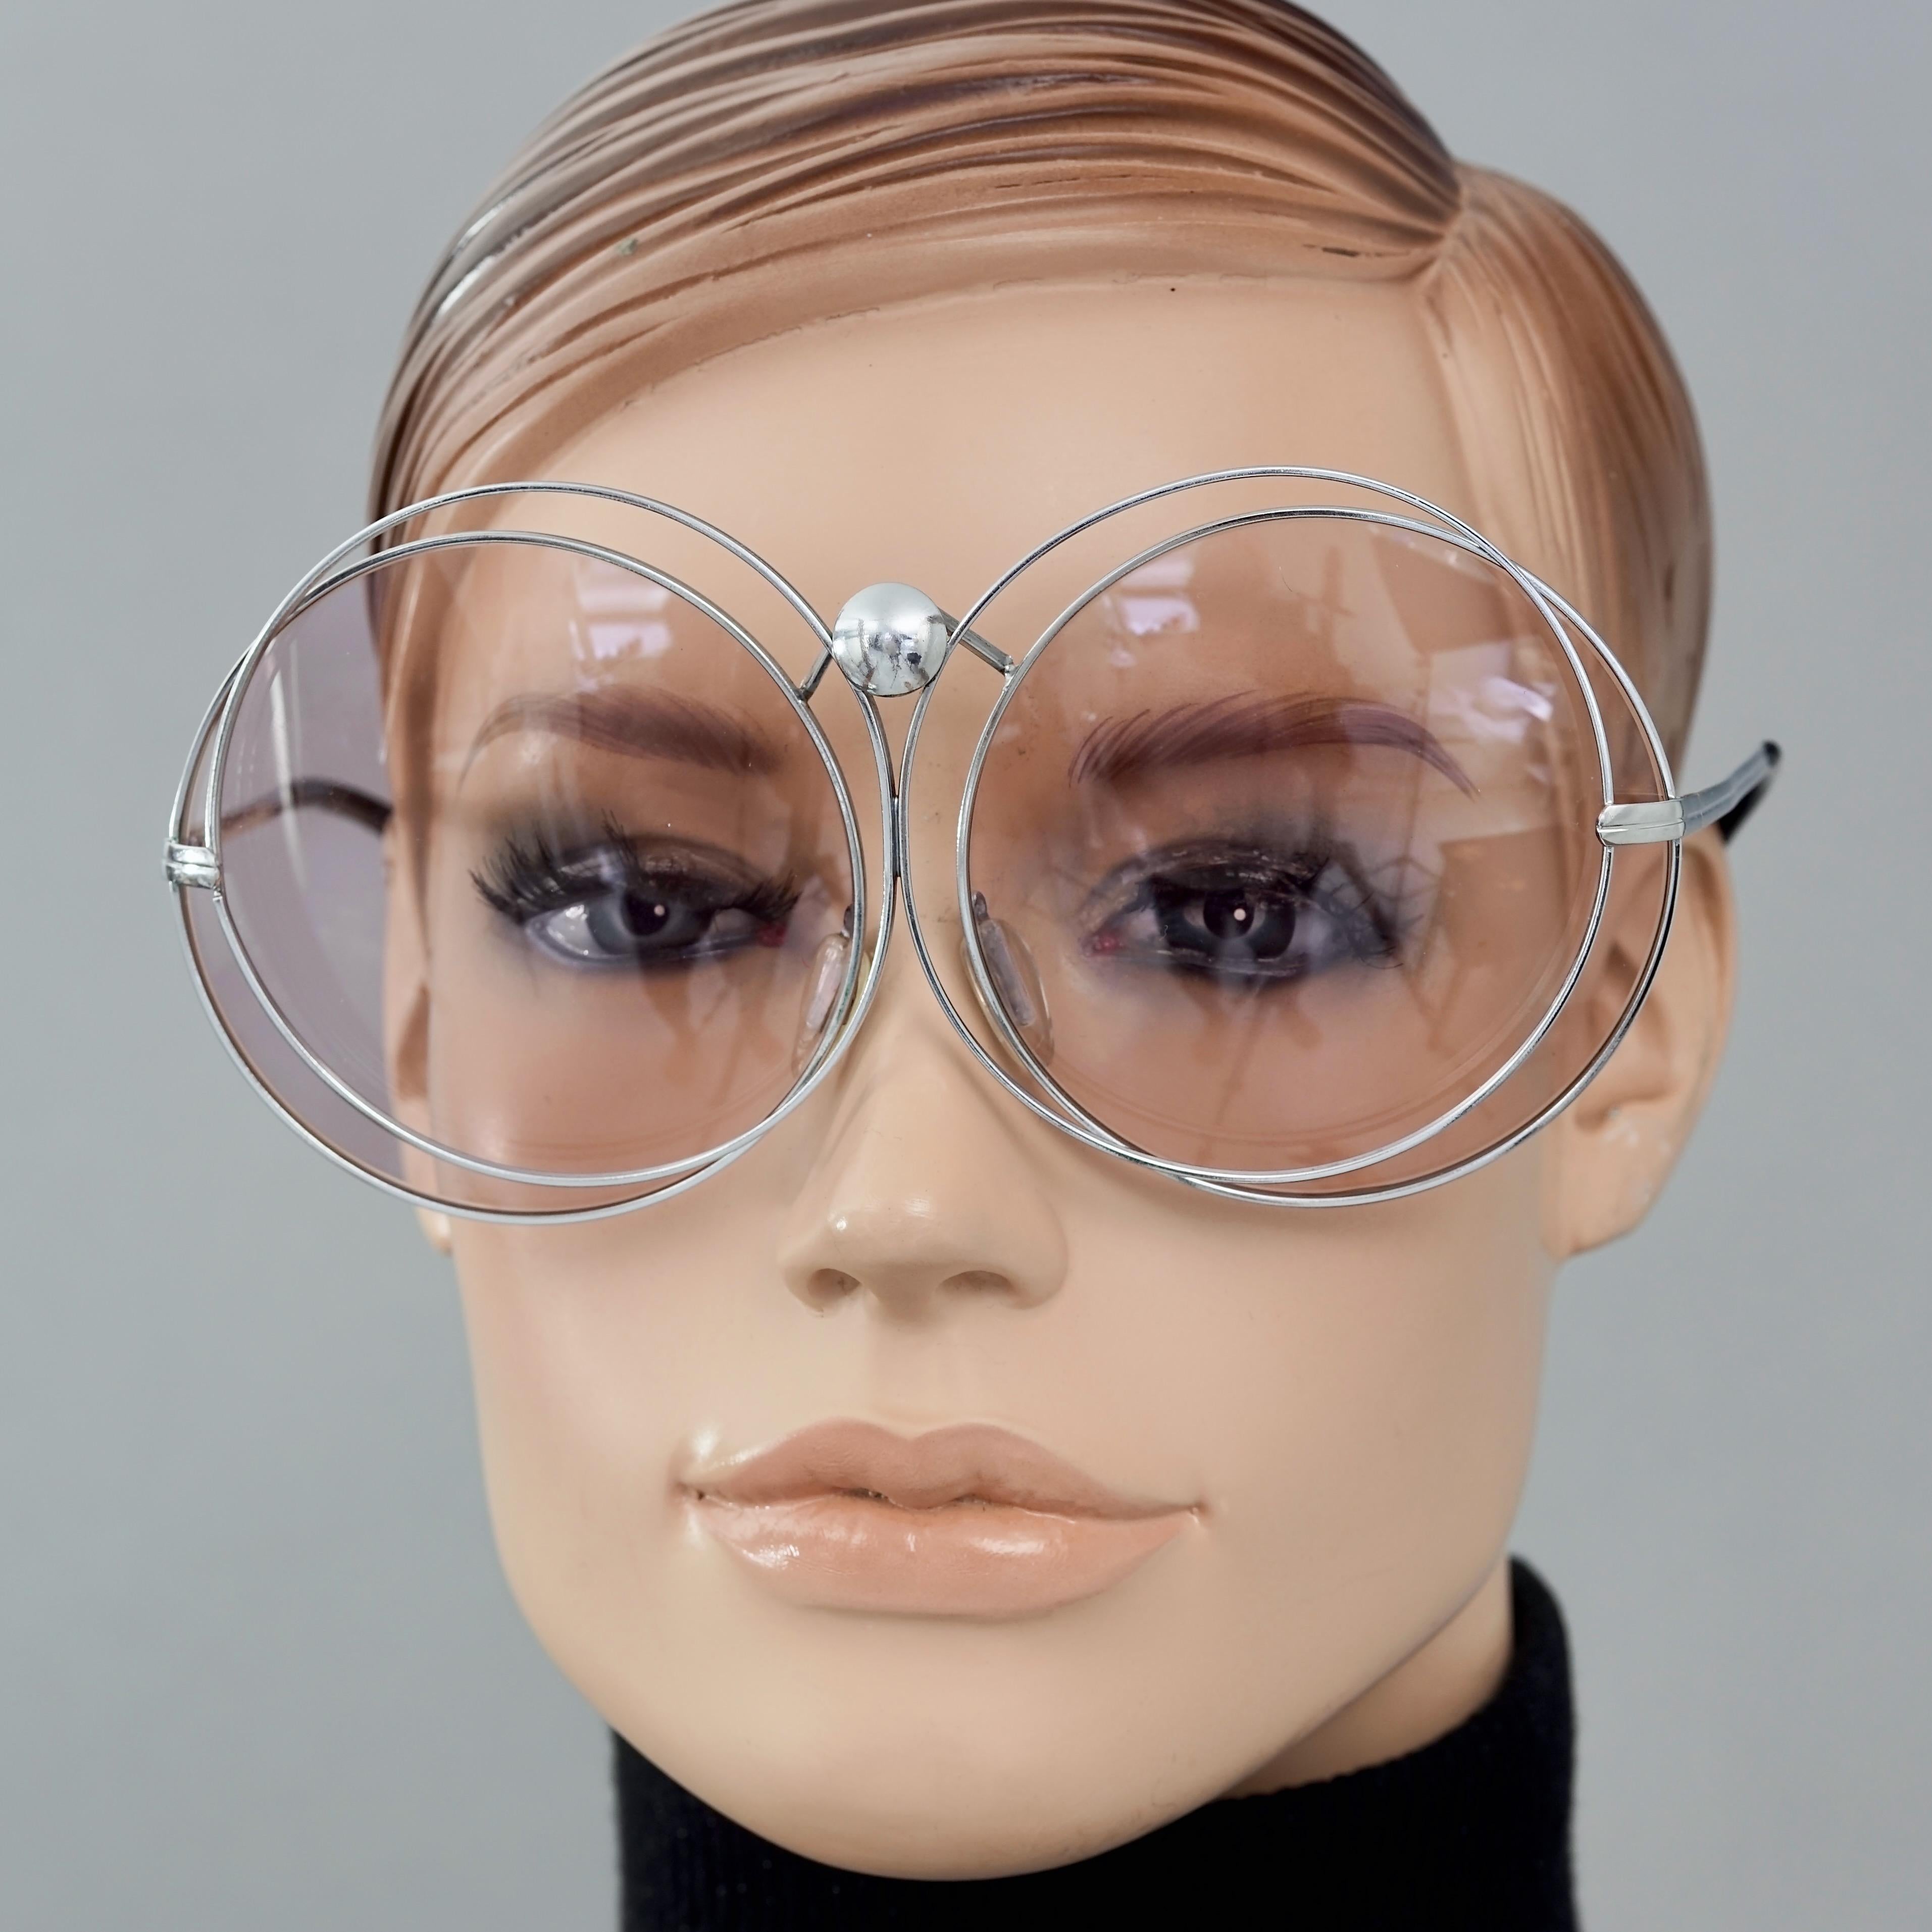 Vintage CHRISTIAN DIOR Oversized Purple Round Interlocked Silver Sunglasses

Measurements:
Height: 2.95 inches (7.5 cm)
Horizontal Width: 6.29 inches (16 cm)
Temples: 4.84 inches (12.3 cm)

Features:
- 100% Authentic Vintage CHRISTIAN DIOR. 
-